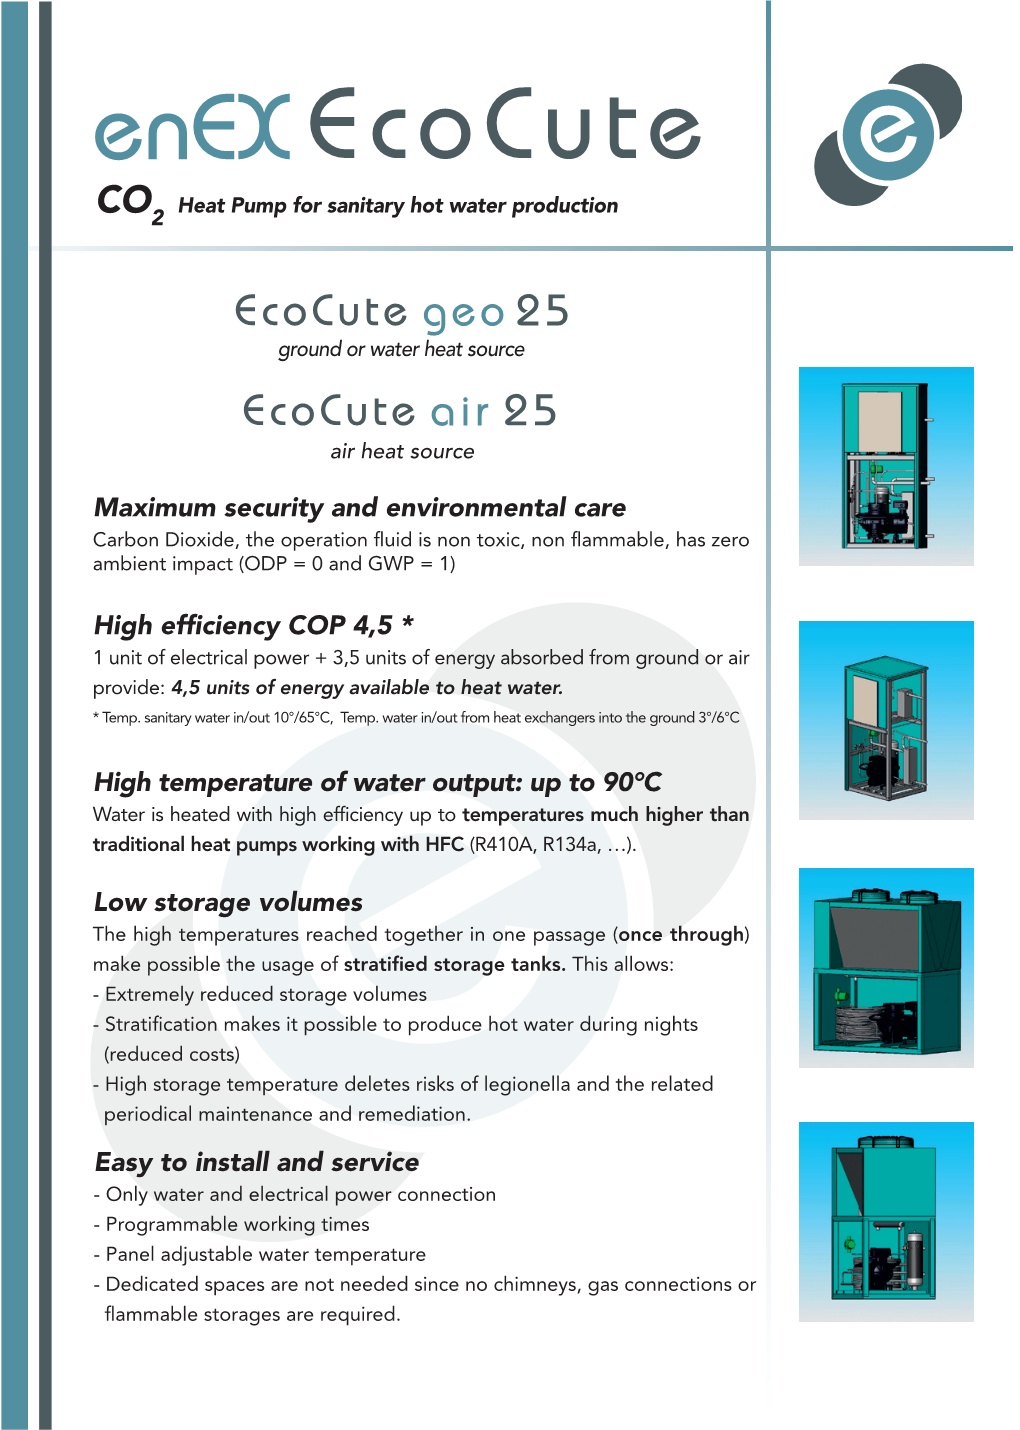 Ecocute Heat Pump for Sanitary Hot Water Production CO2